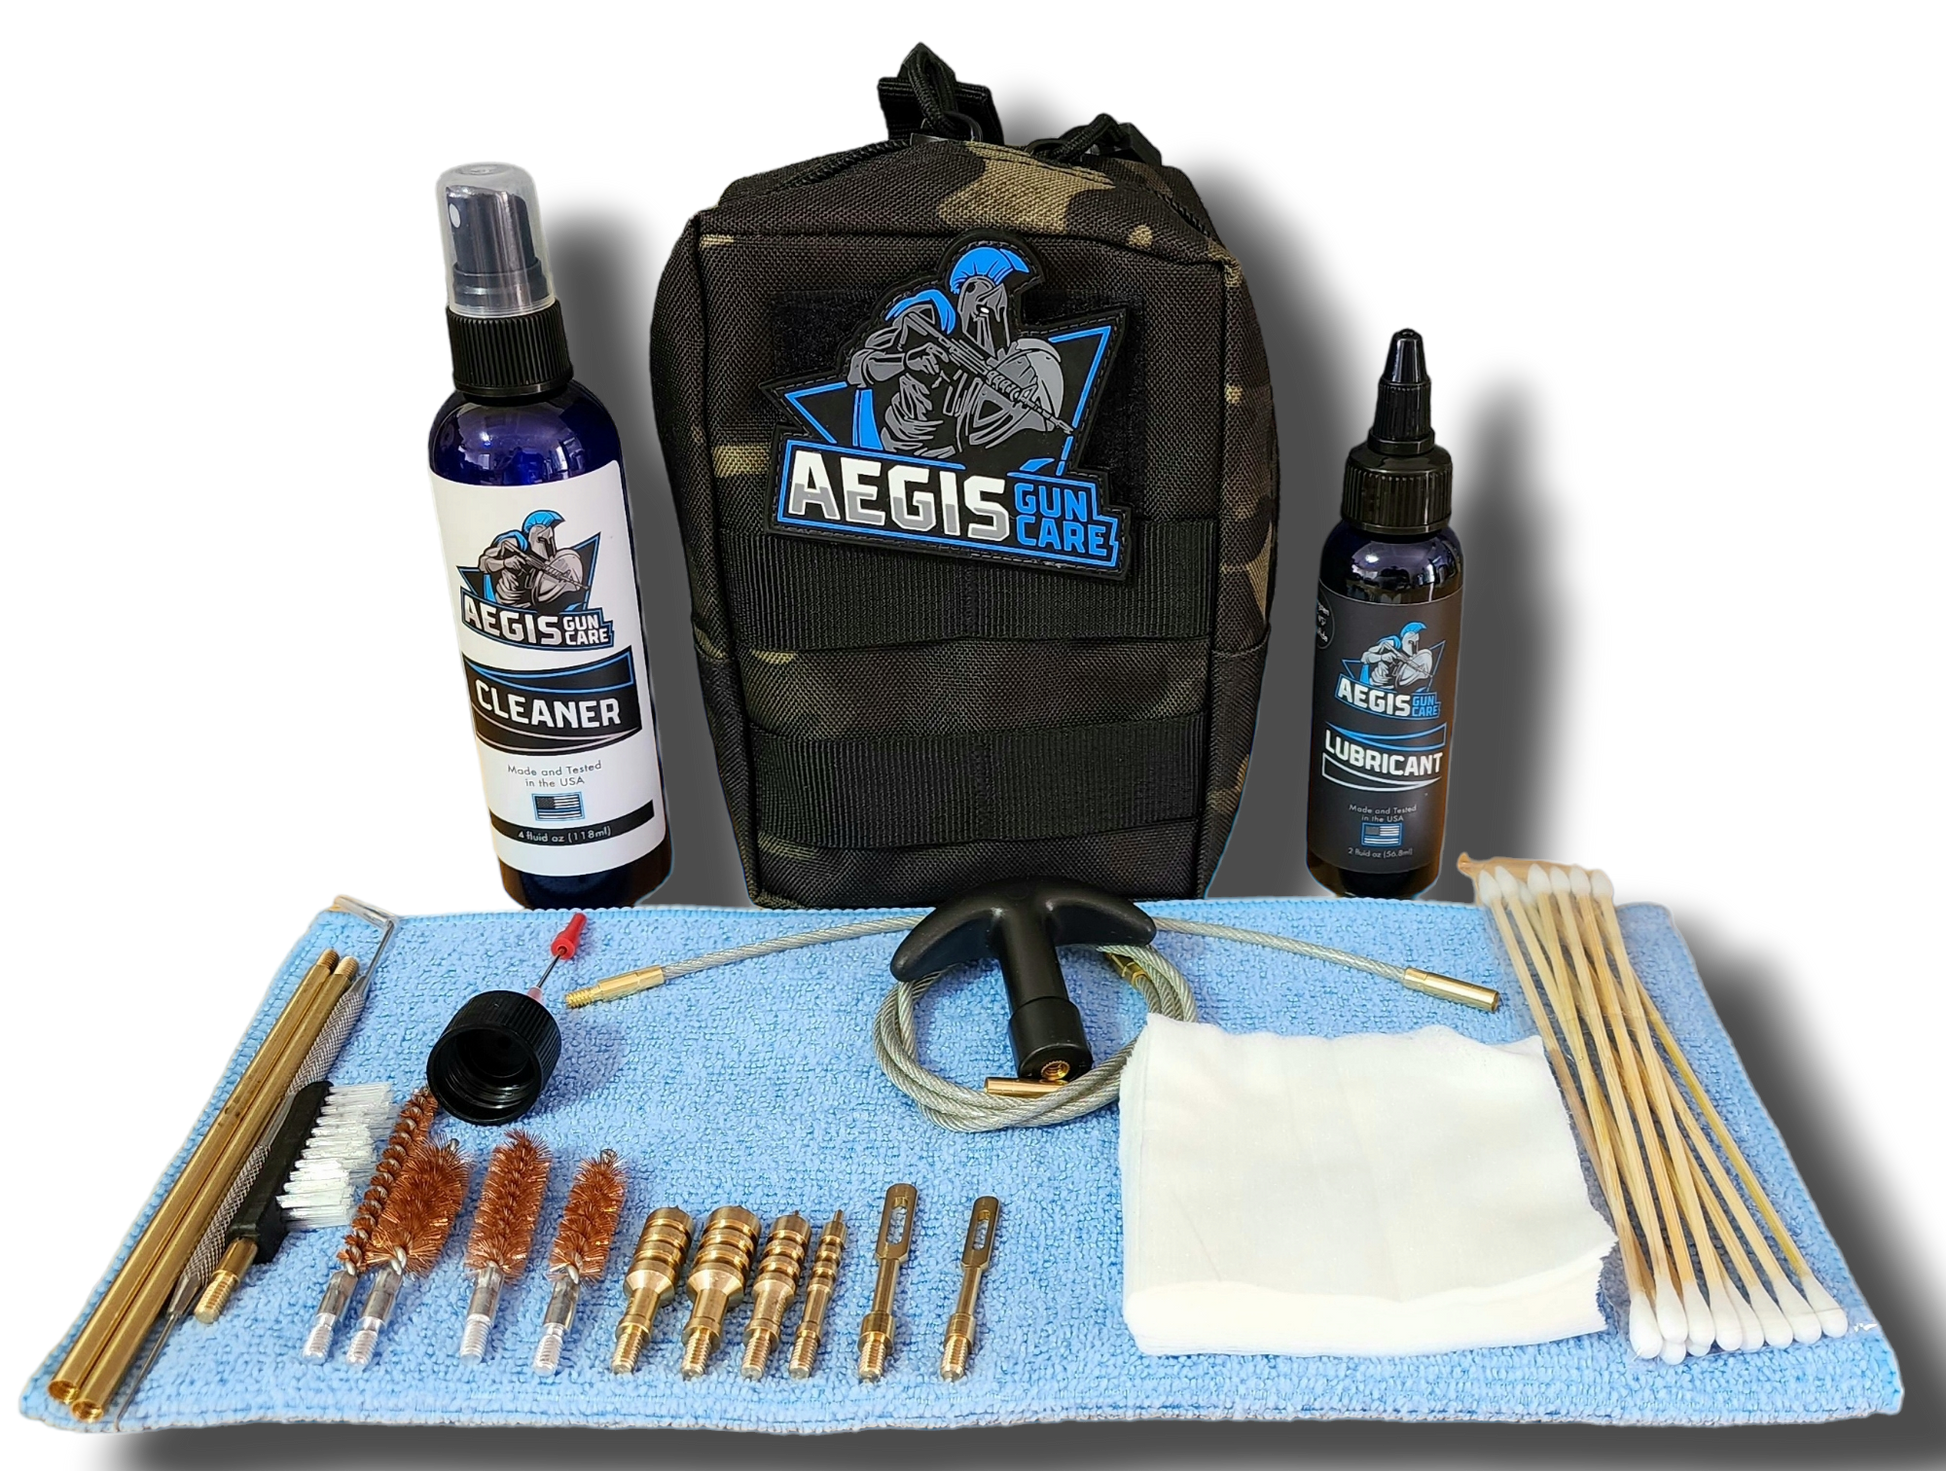 Aegis deluxe field cleaning kit (woodland camo)